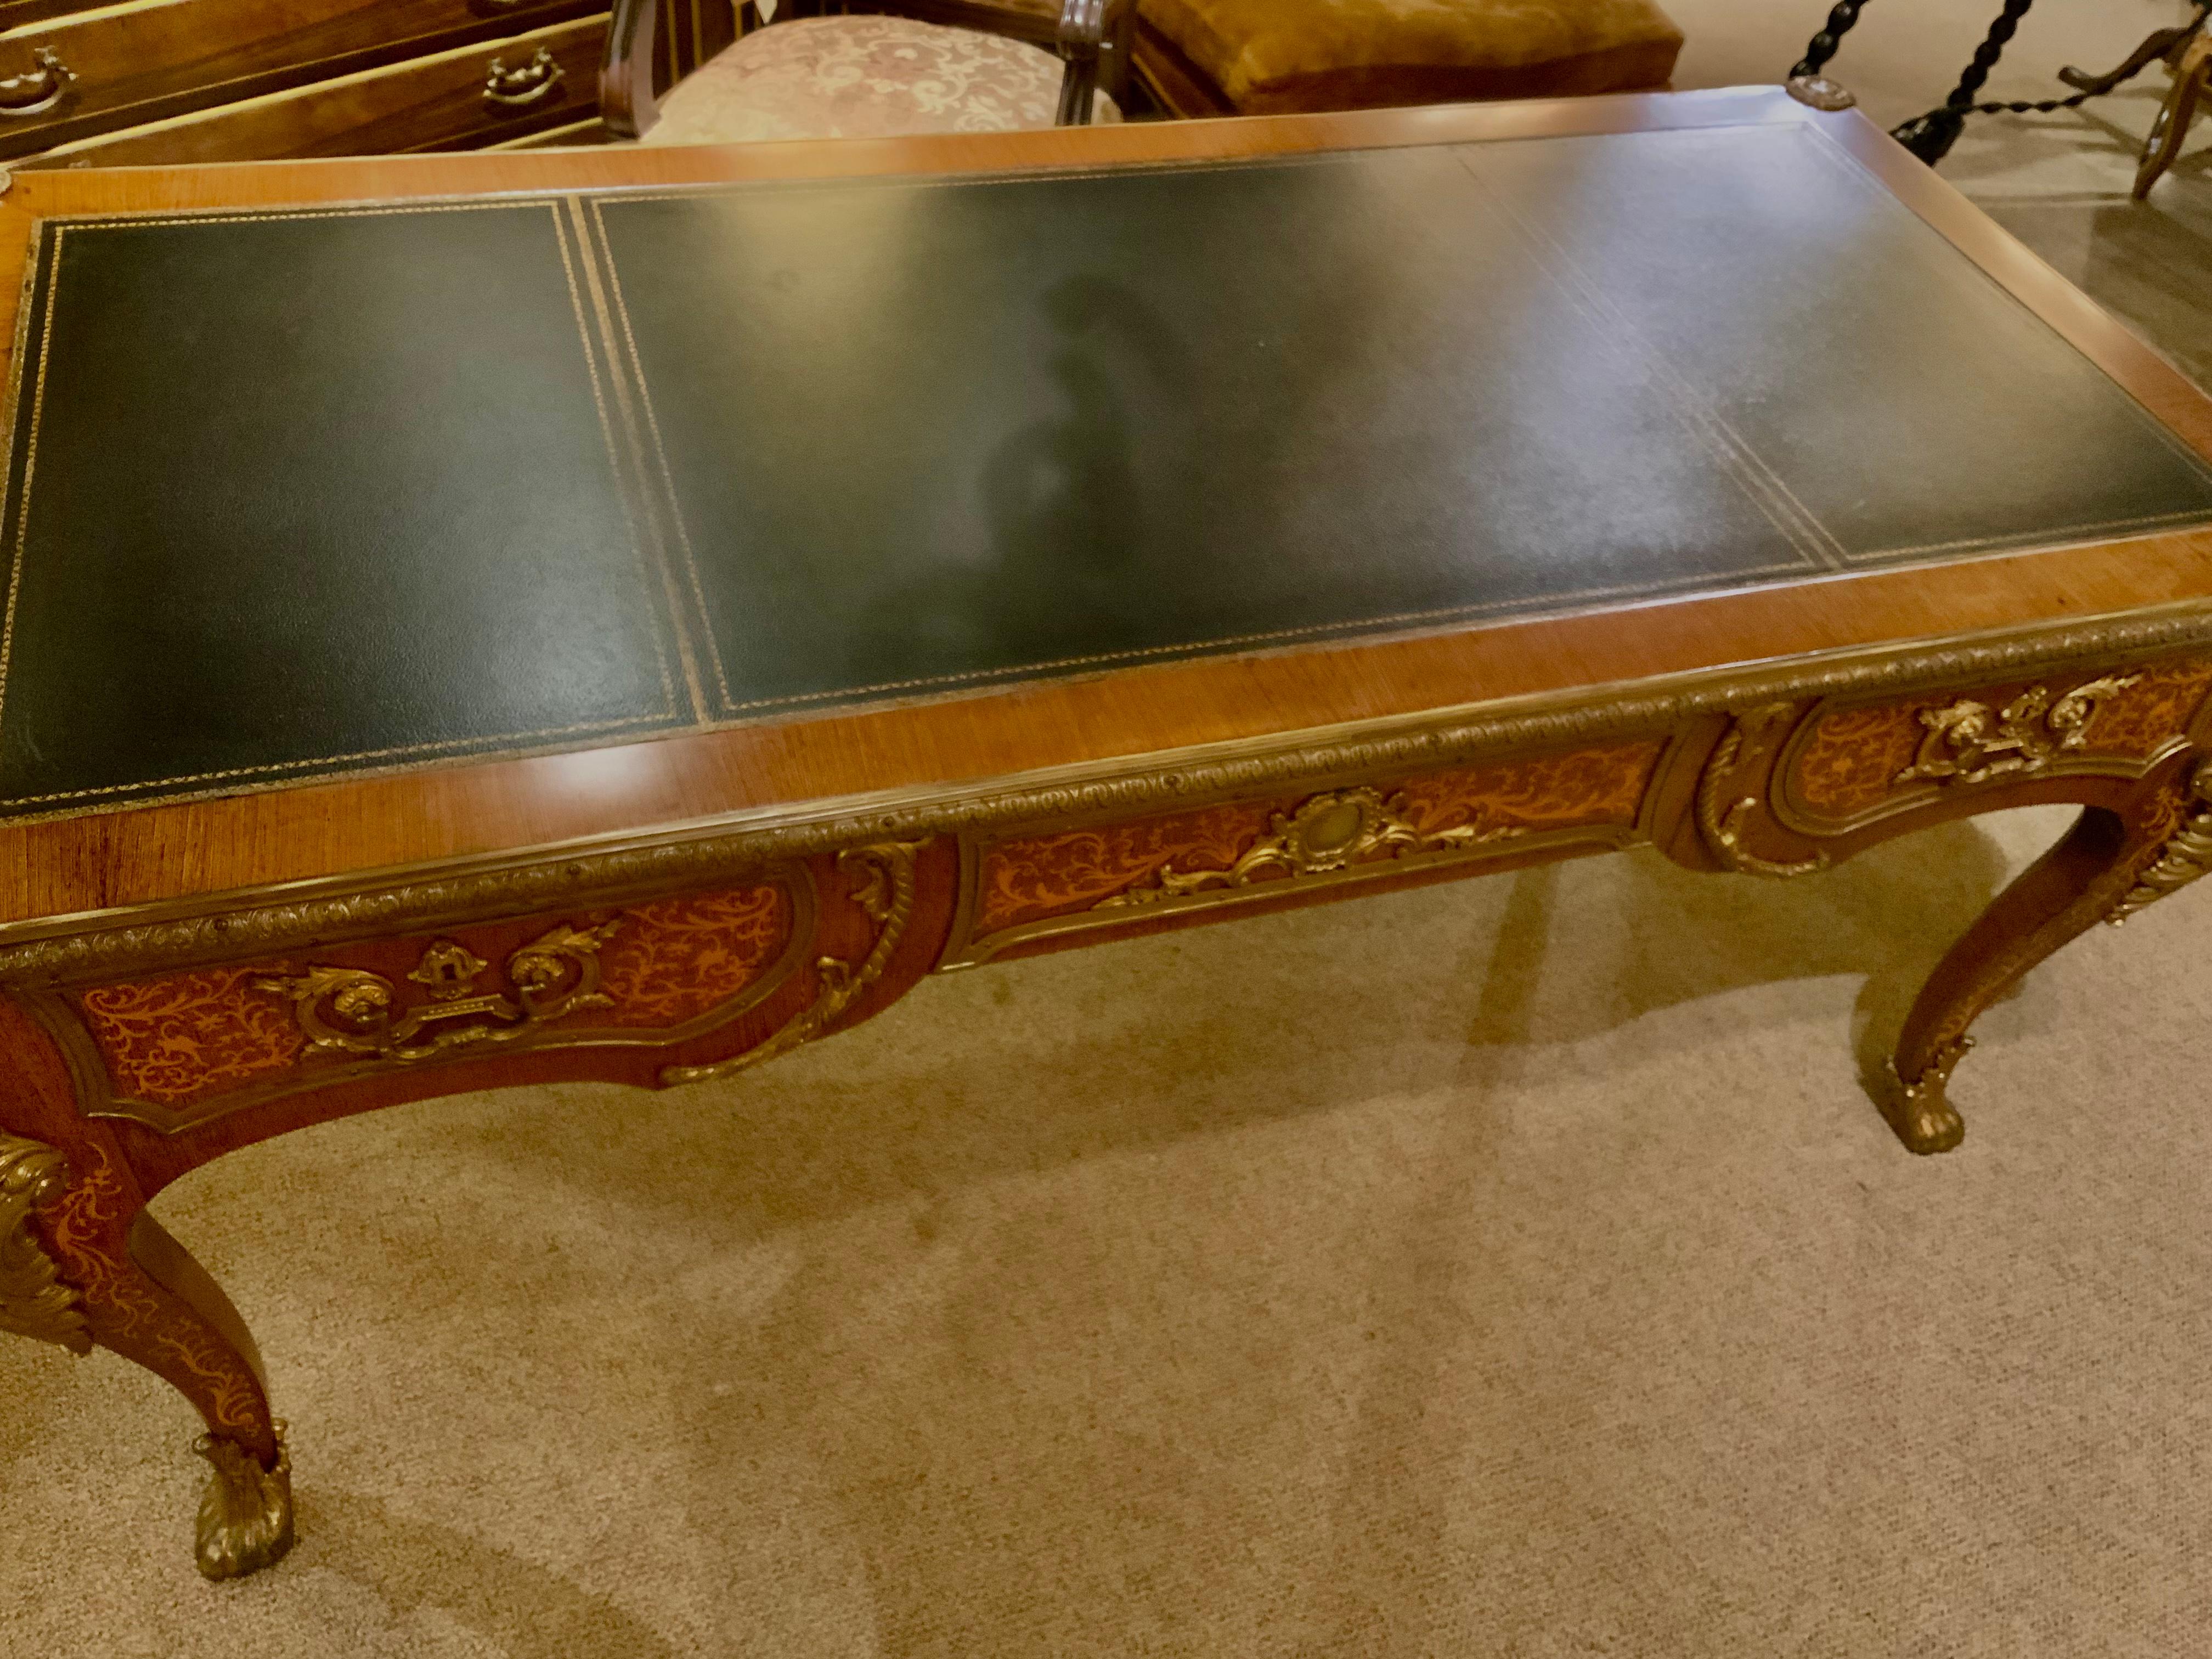 20th Century French Bureau Plat 20th C. with Black Gilt Trim Writing Surface For Sale